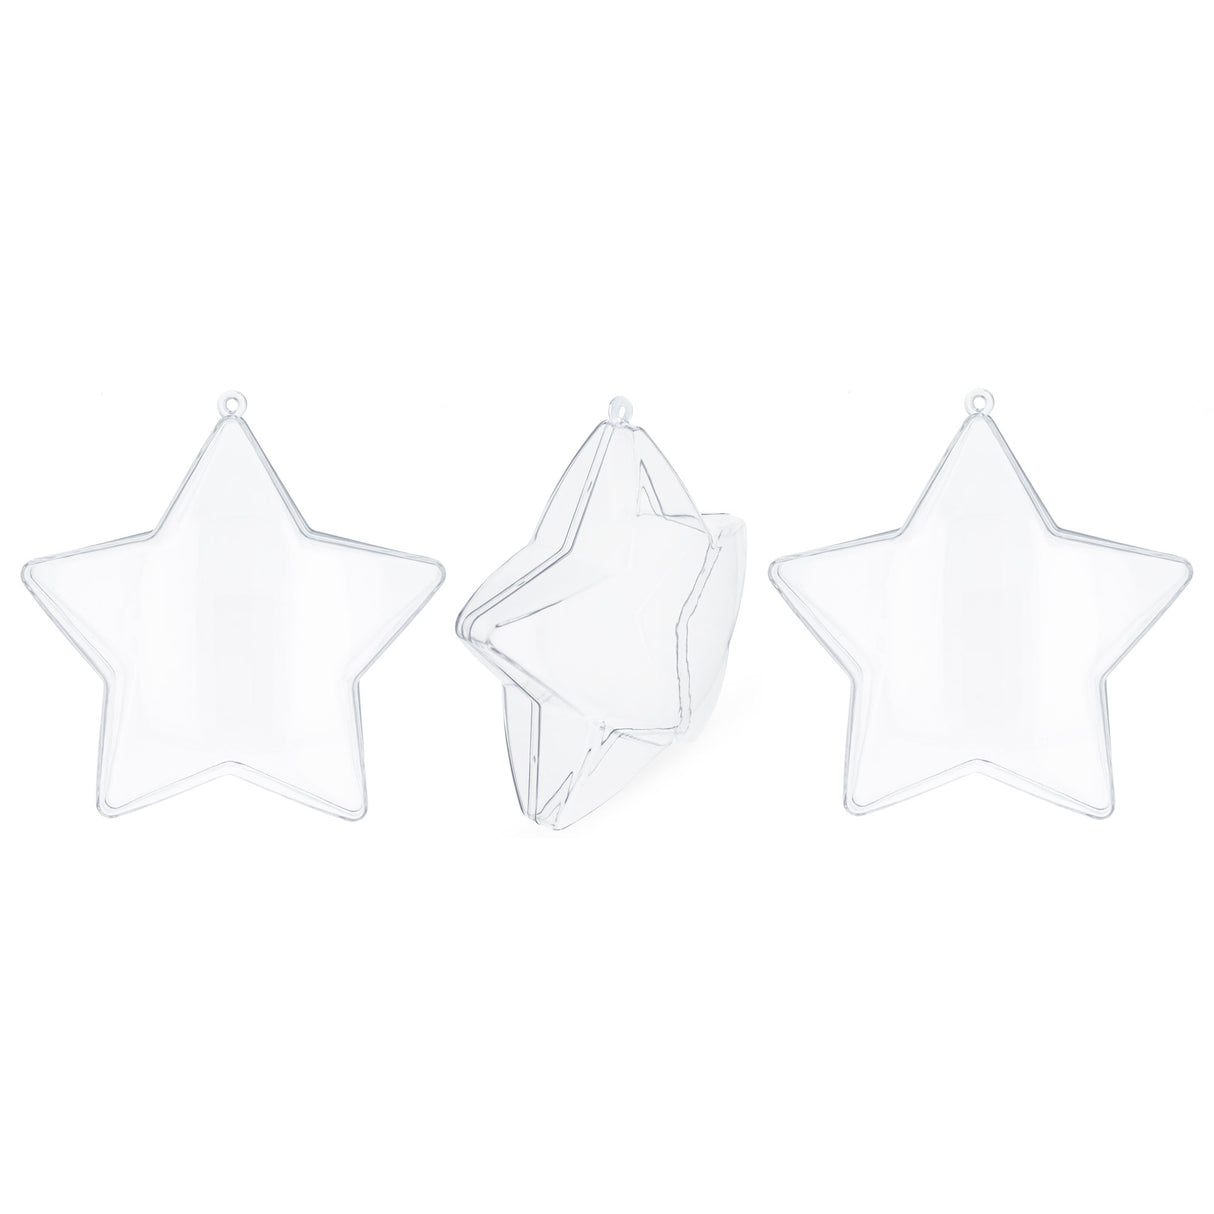 Plastic Set of 3 Clear Plastic Star Ornaments 4 Inches in Clear color Star